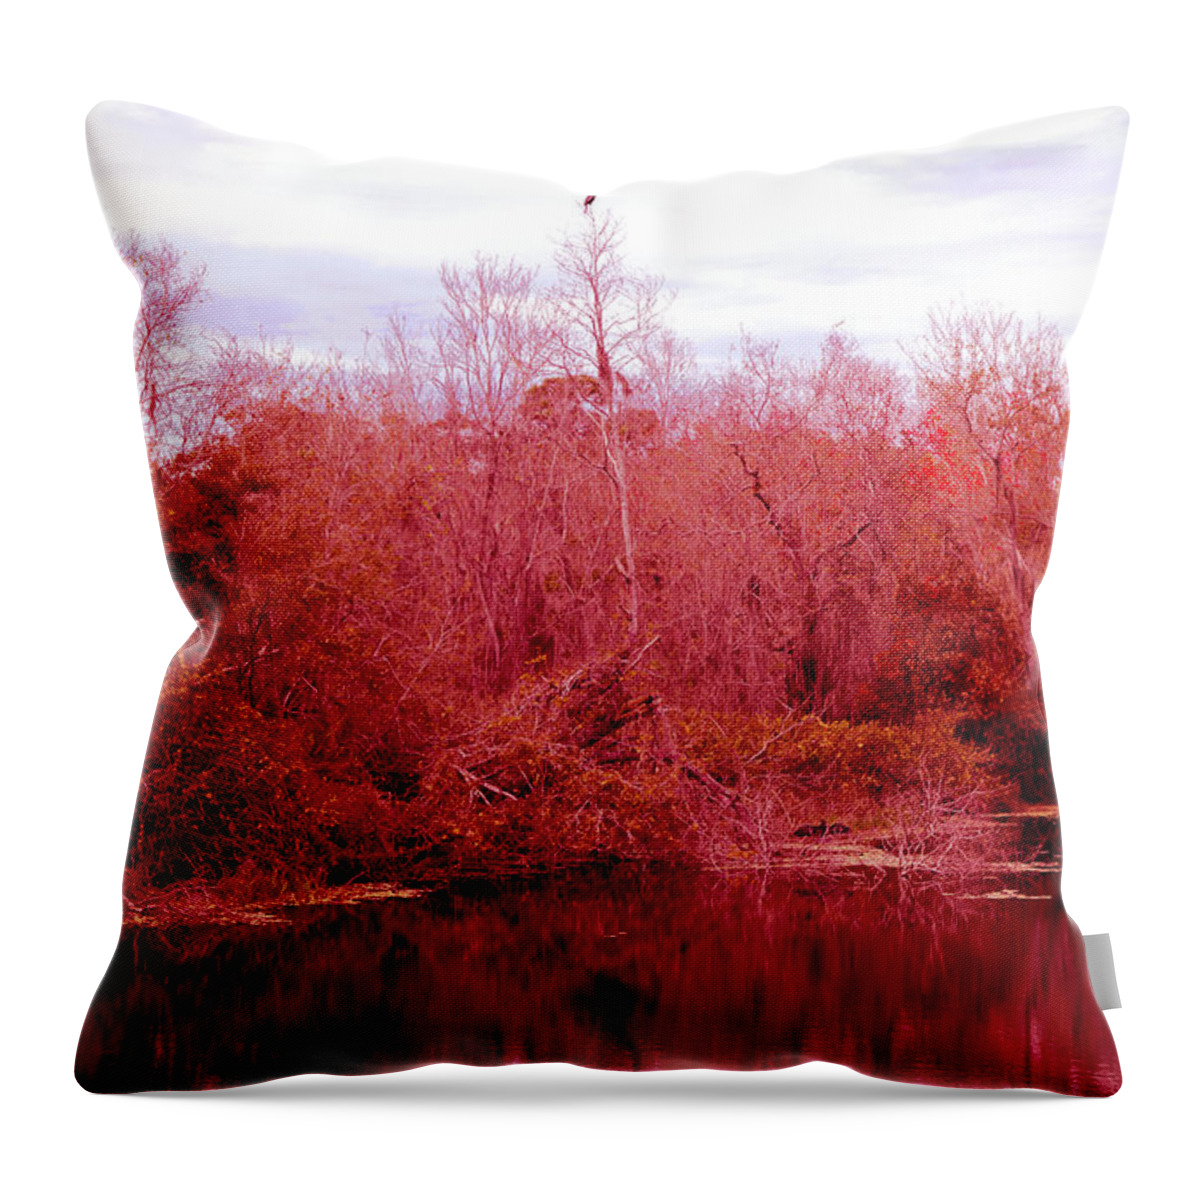 Bird Throw Pillow featuring the photograph Bird Out On A Limb by Madeline Ellis